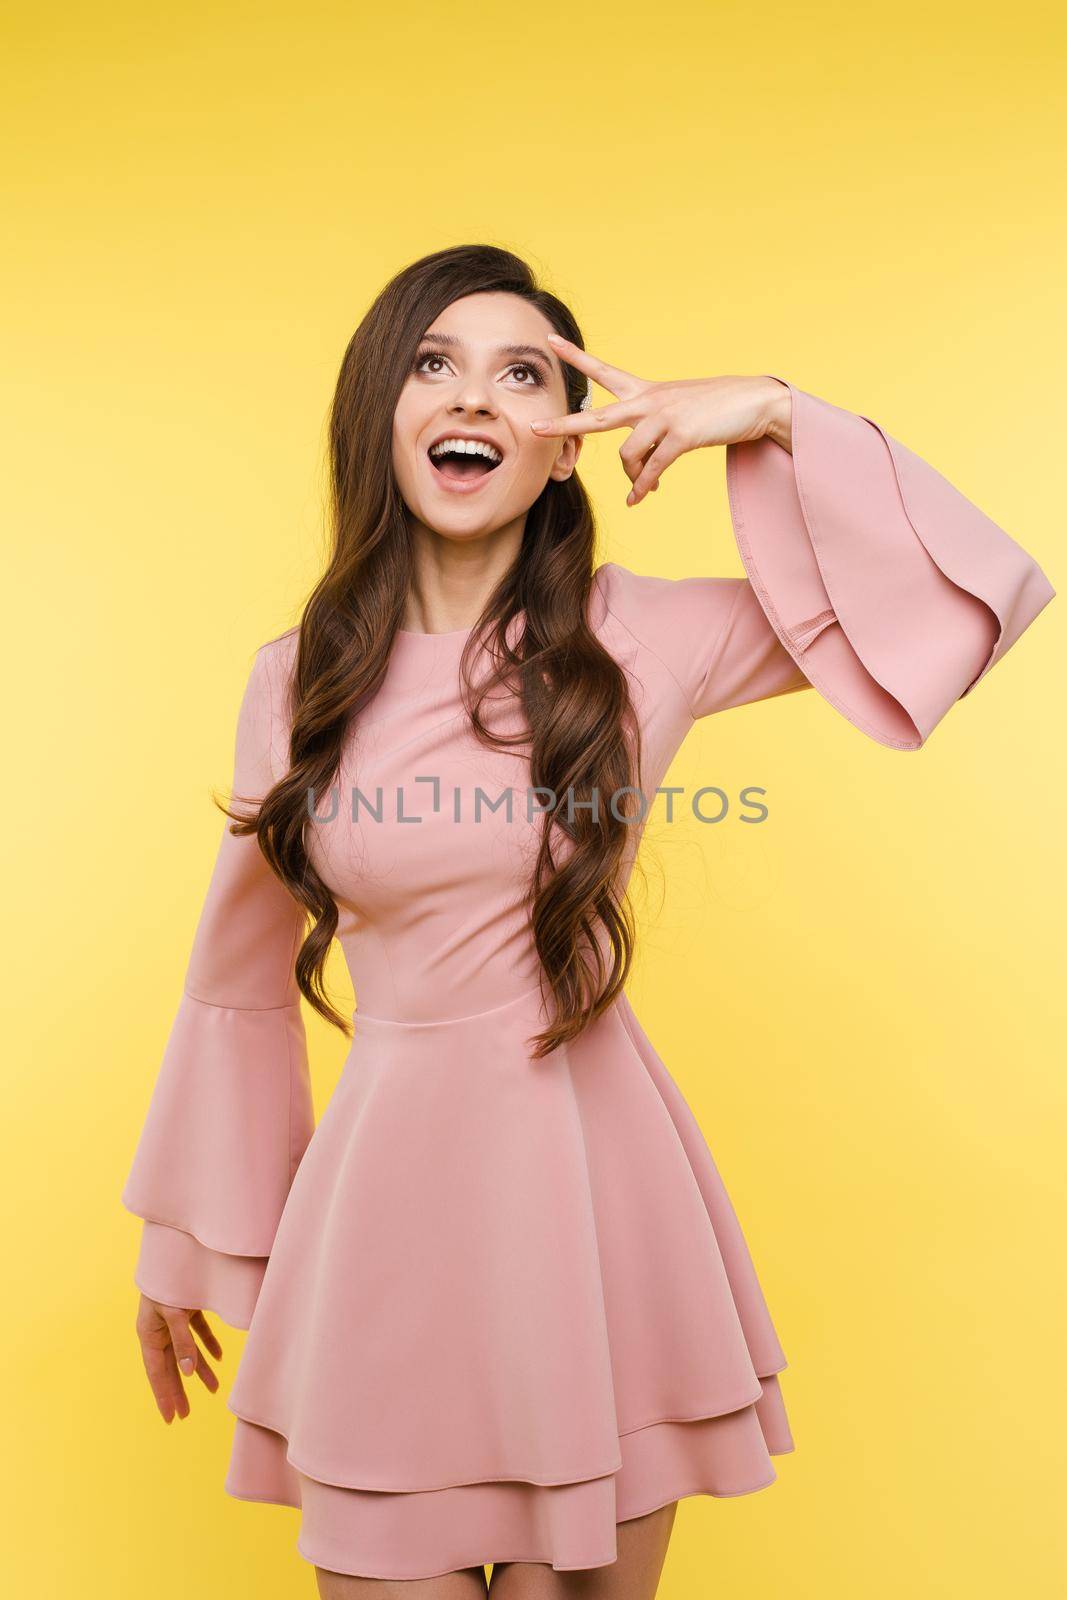 Excited stunning lady with long wavy hairstyle wearing trendy pink blouse showing ok gesture looking up with open mouth. Isolate on yellow.